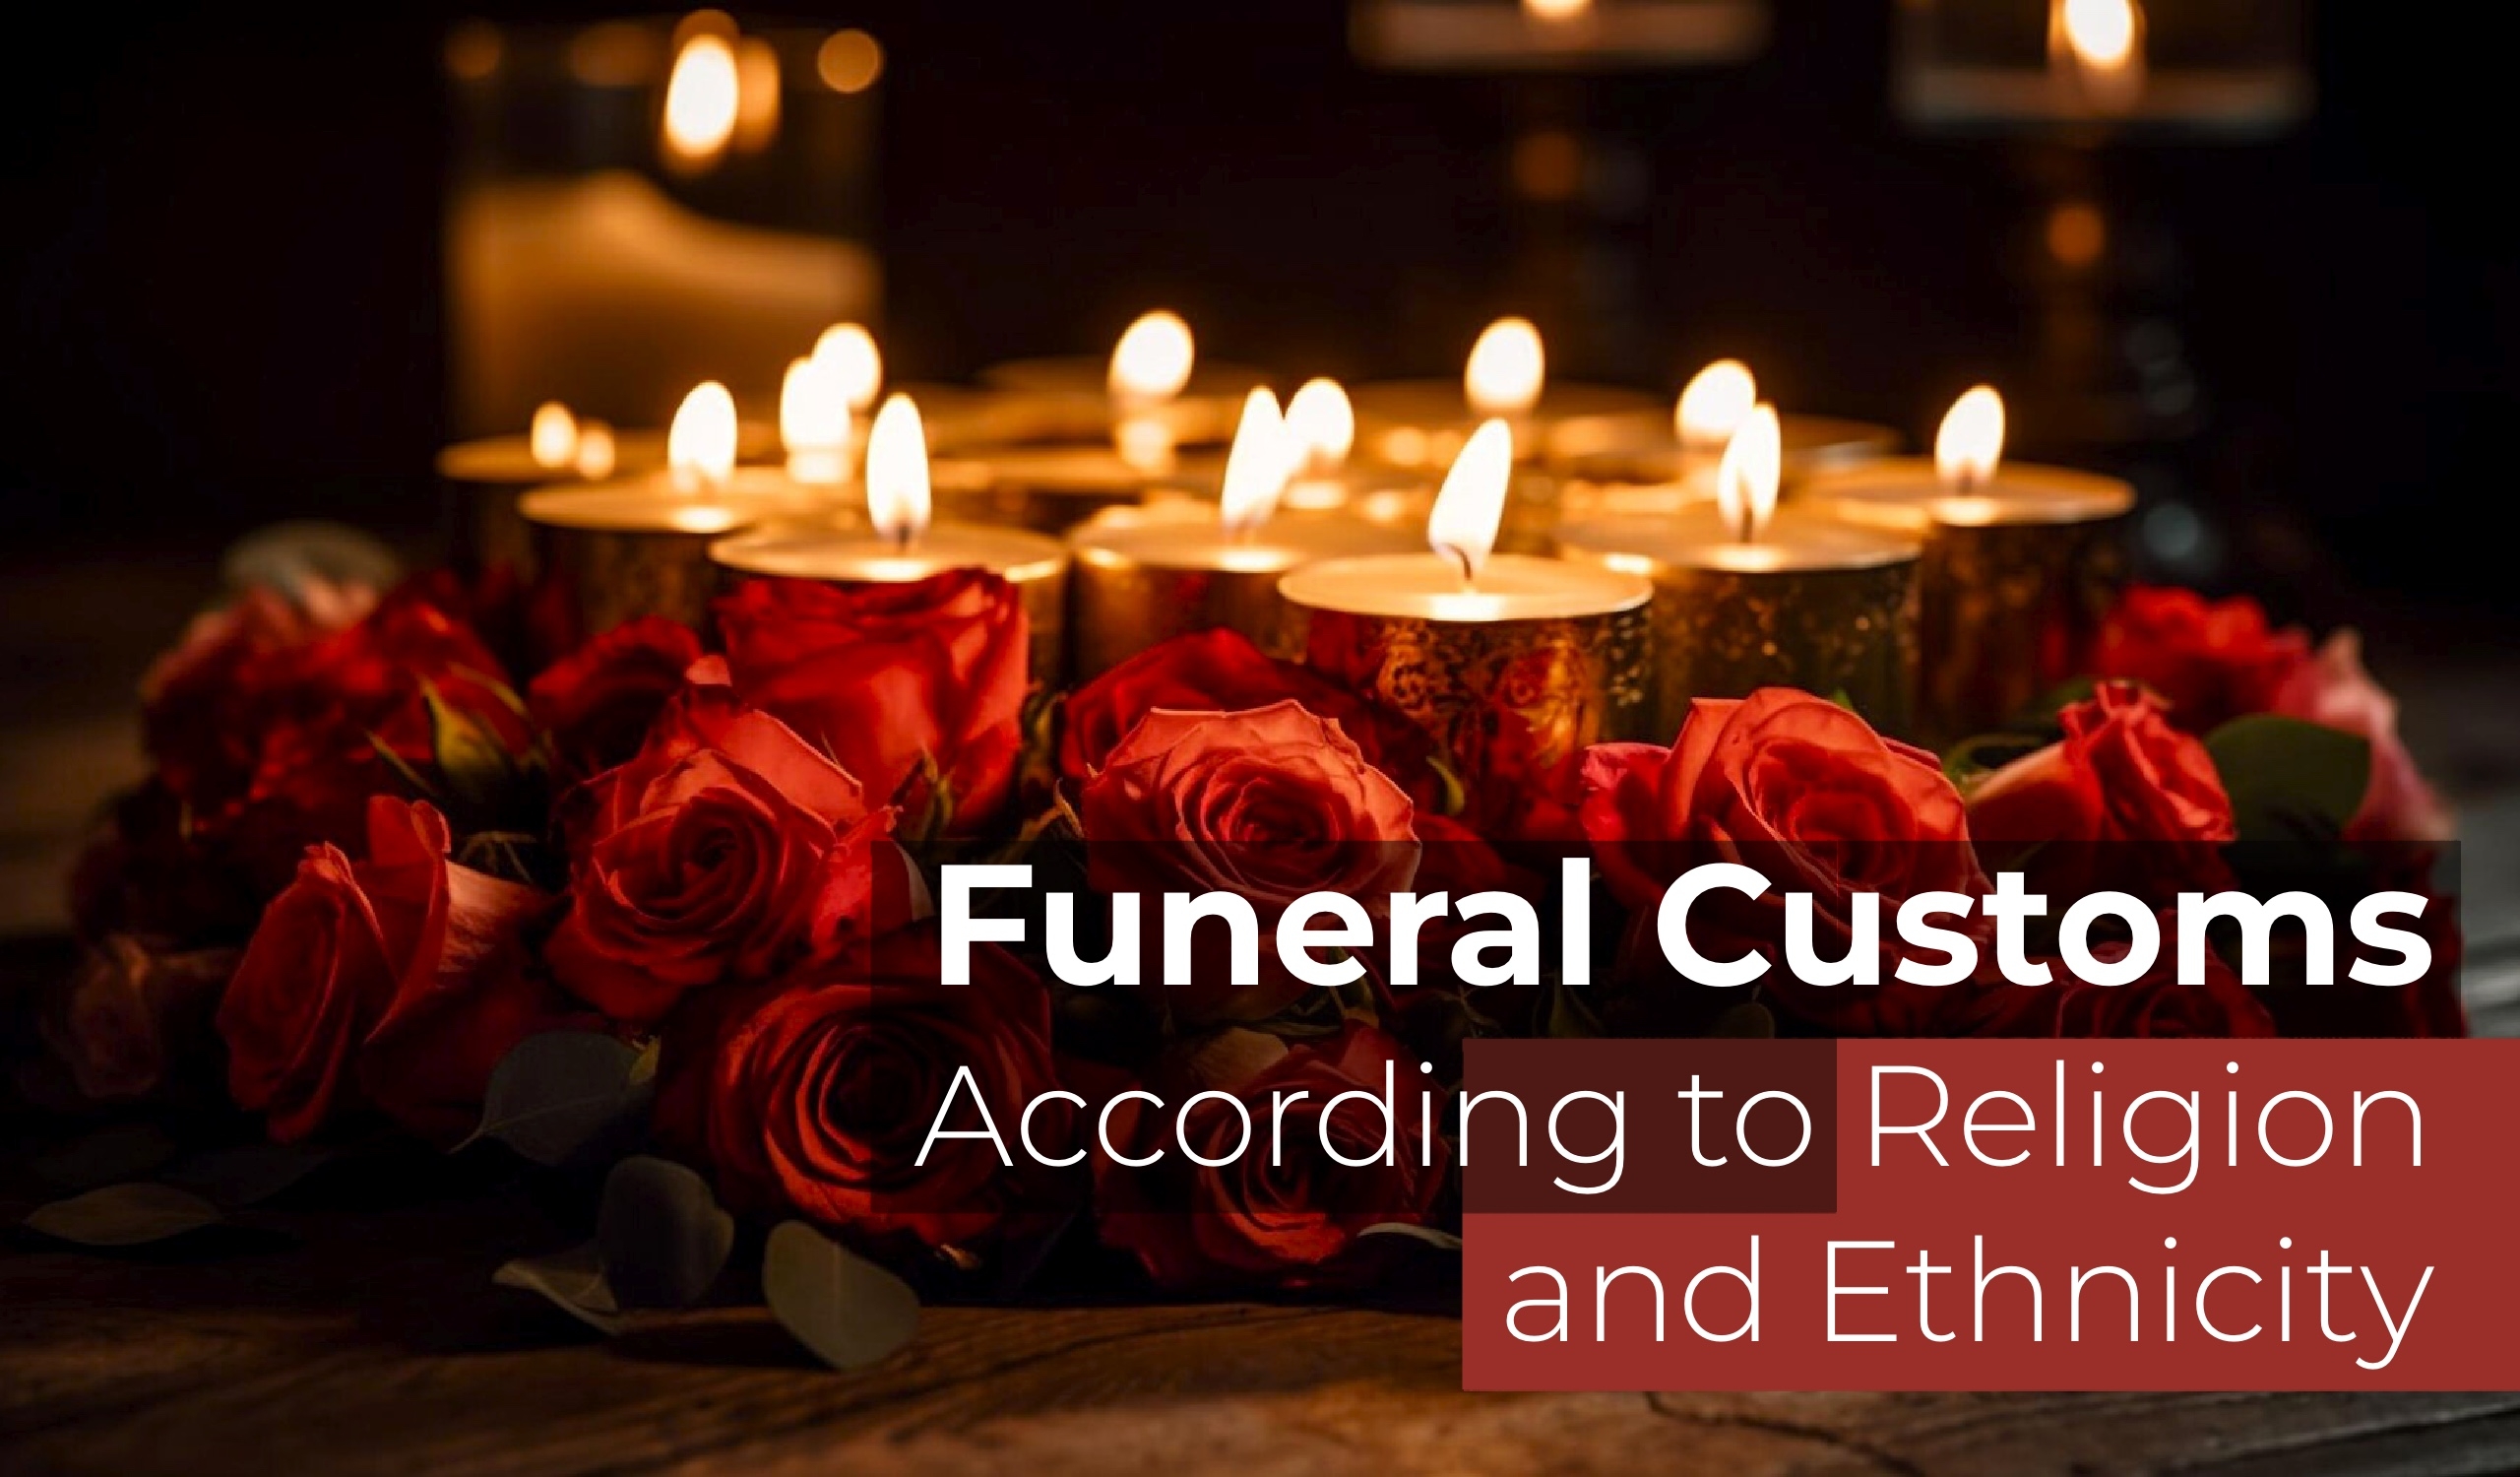 Funeral Customs According to Religion and Ethnicity